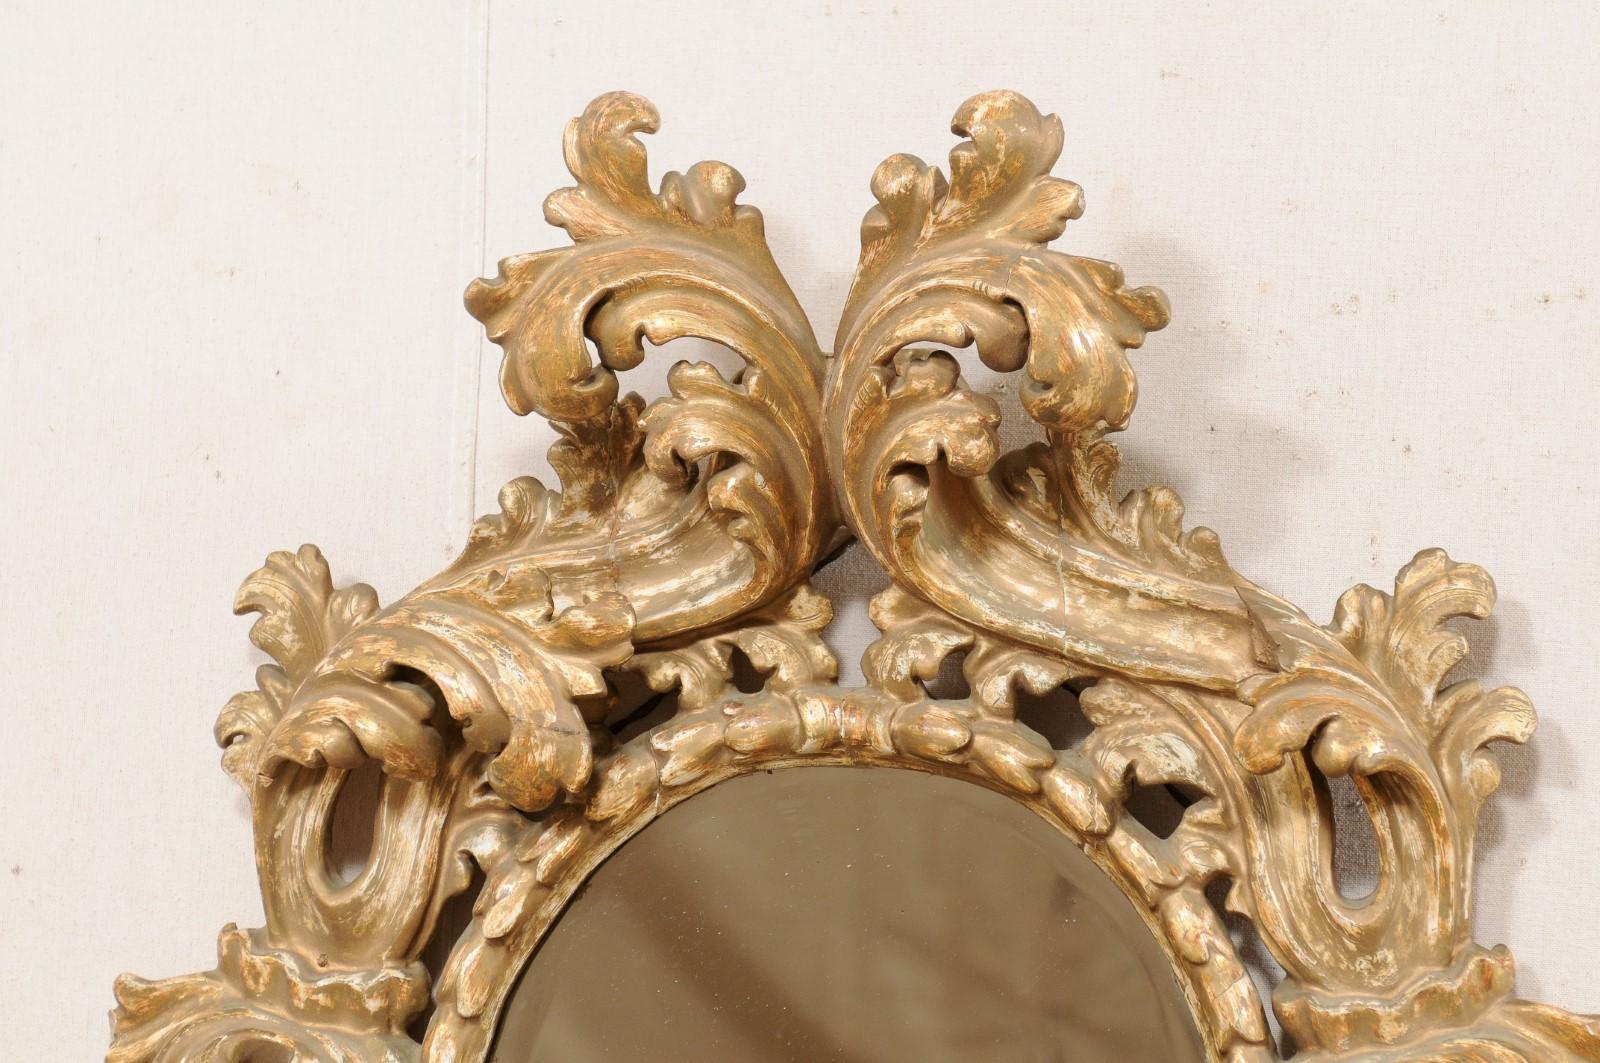 18th Century Italian Ornate Acanthus-Carved Mirror w/Oblong, Oval-Shaped Glass, 18th/19th C. For Sale